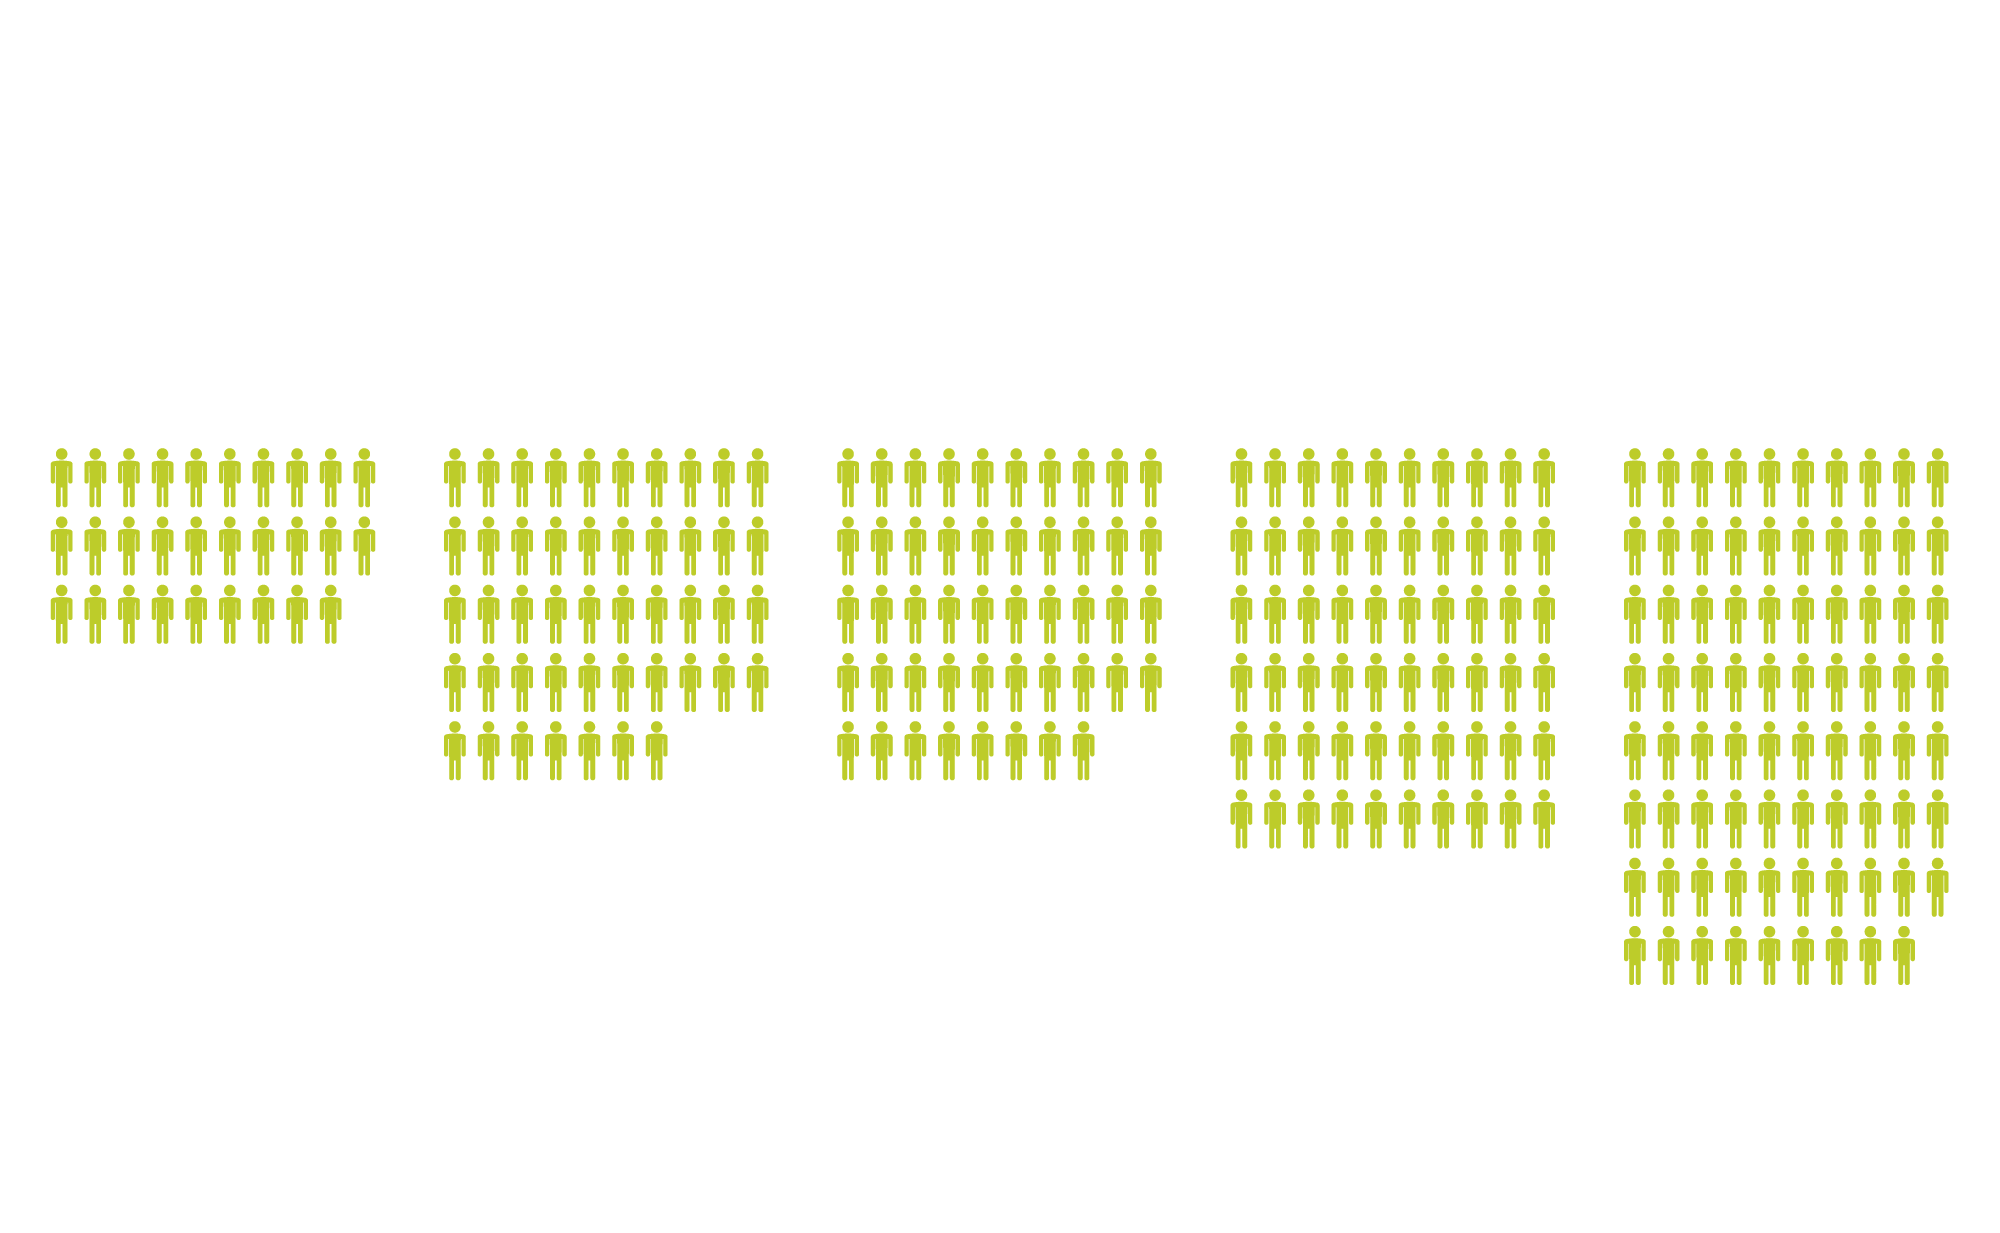 Odds of finding a match based on ethnic background. Black or African American 29%. Asian or Pacific Islander 47%. Hispanic or Latino 48%. Native American 60%. White 79%.